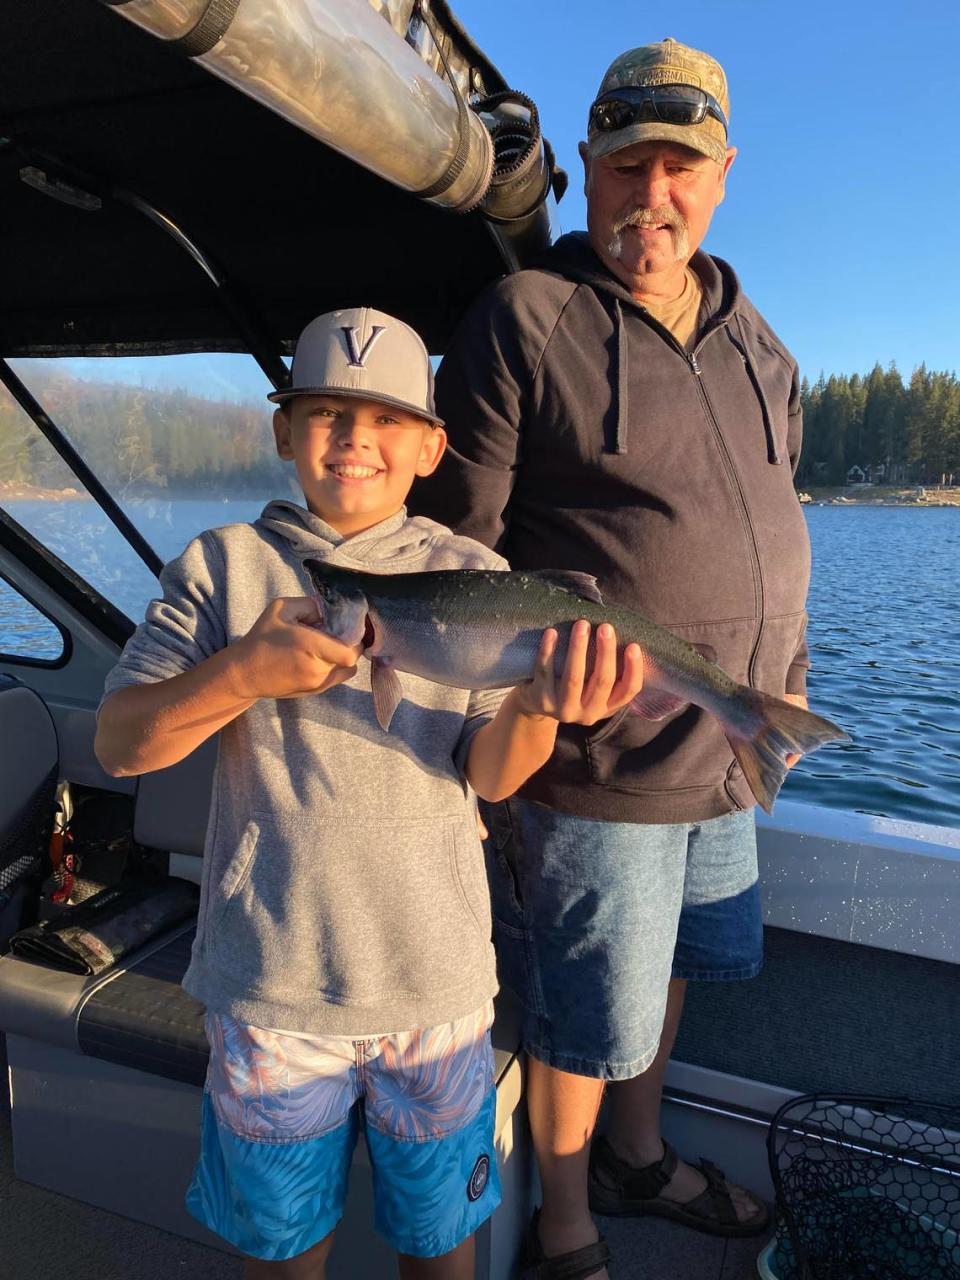 Ten year-old Reed Schiebelhut, fishing with his grandpa on Shaver Lake on Aug 6, landed his first kokanee which measured 20 inches.